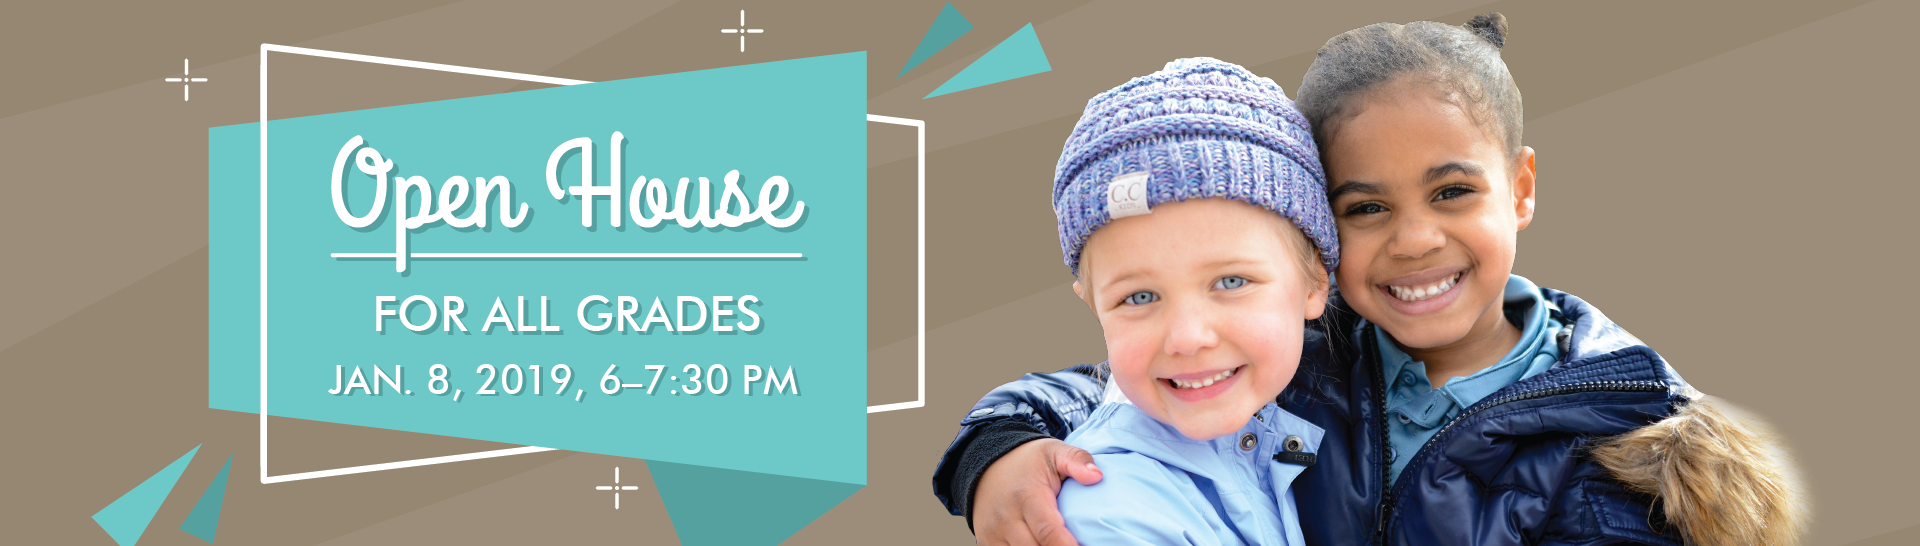 Open House event for all Grades - January 8, 2019 - 6:00–7:30 PM - Athlos Academy of St. Cloud